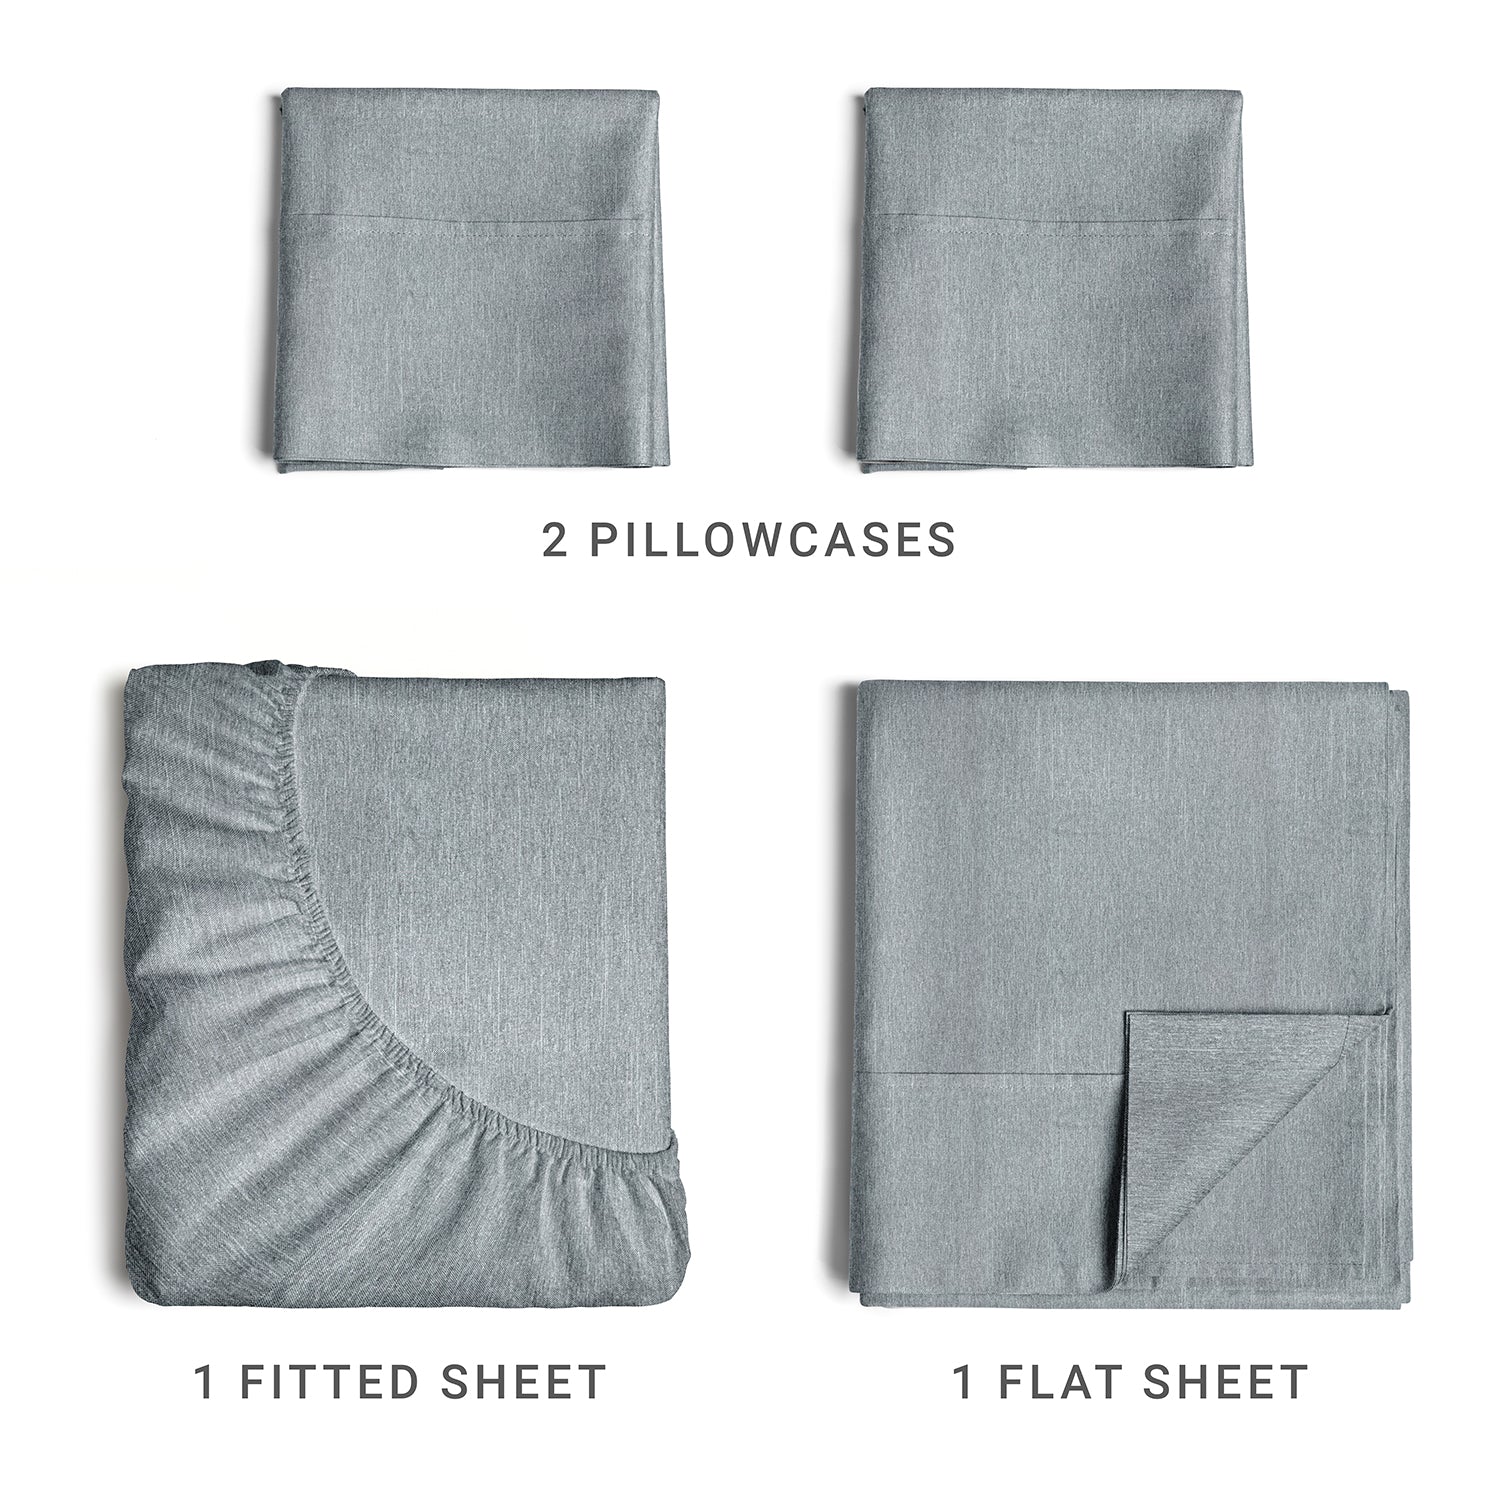 tes 4pc Sheet Set New Colors/Patterns - Heathered Blue